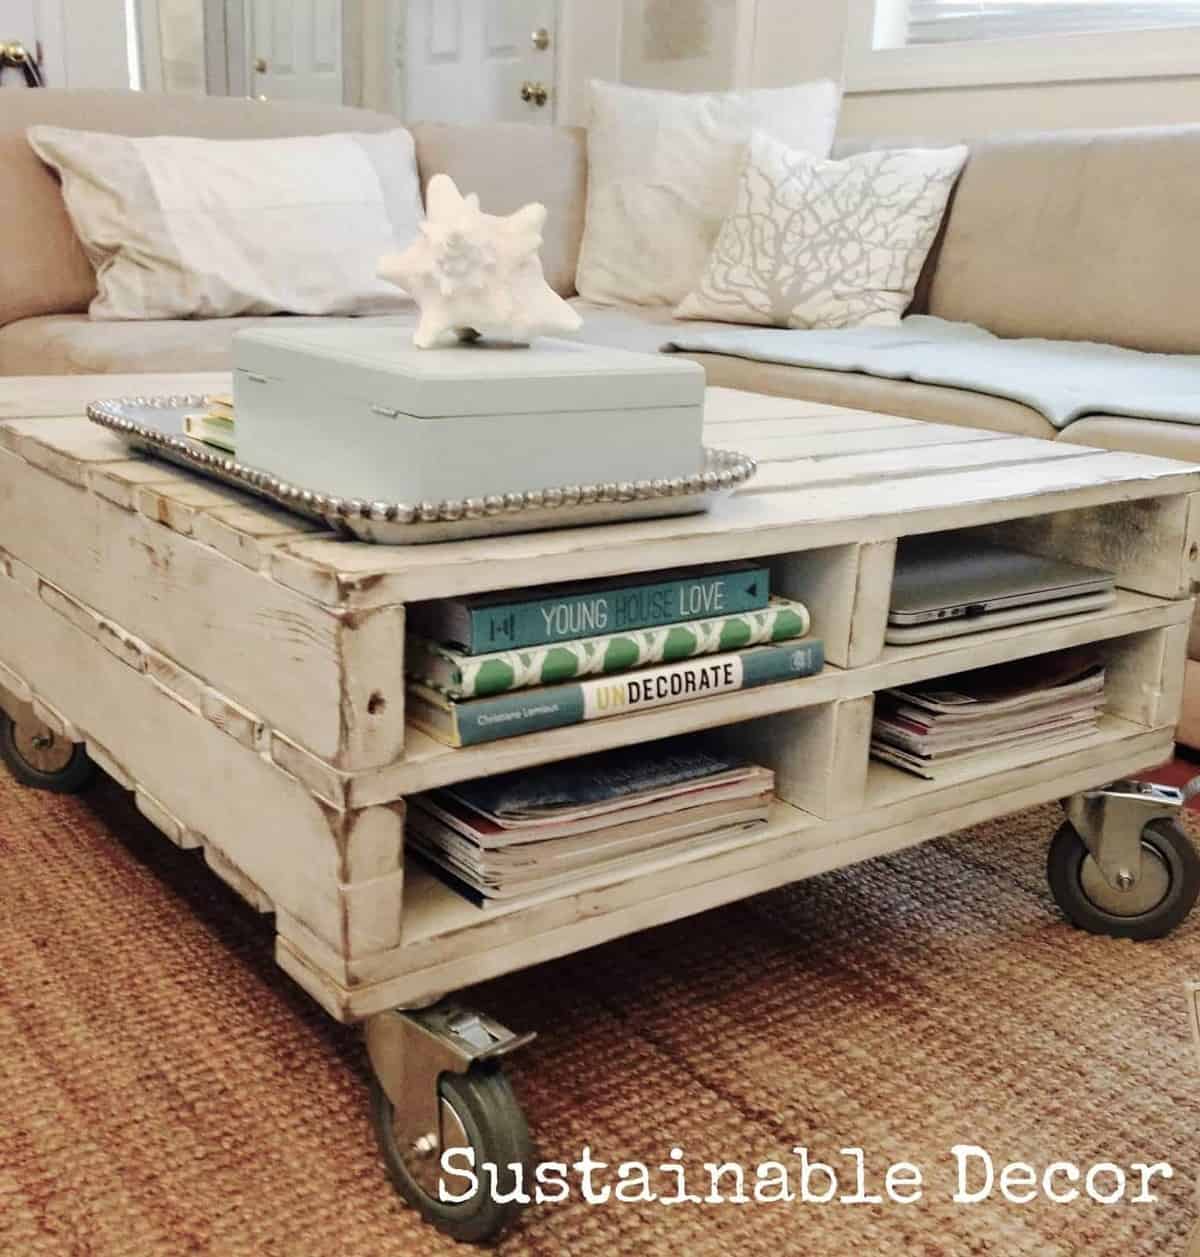 Upcycled Pallet Coffee Table by Sustainable Decor